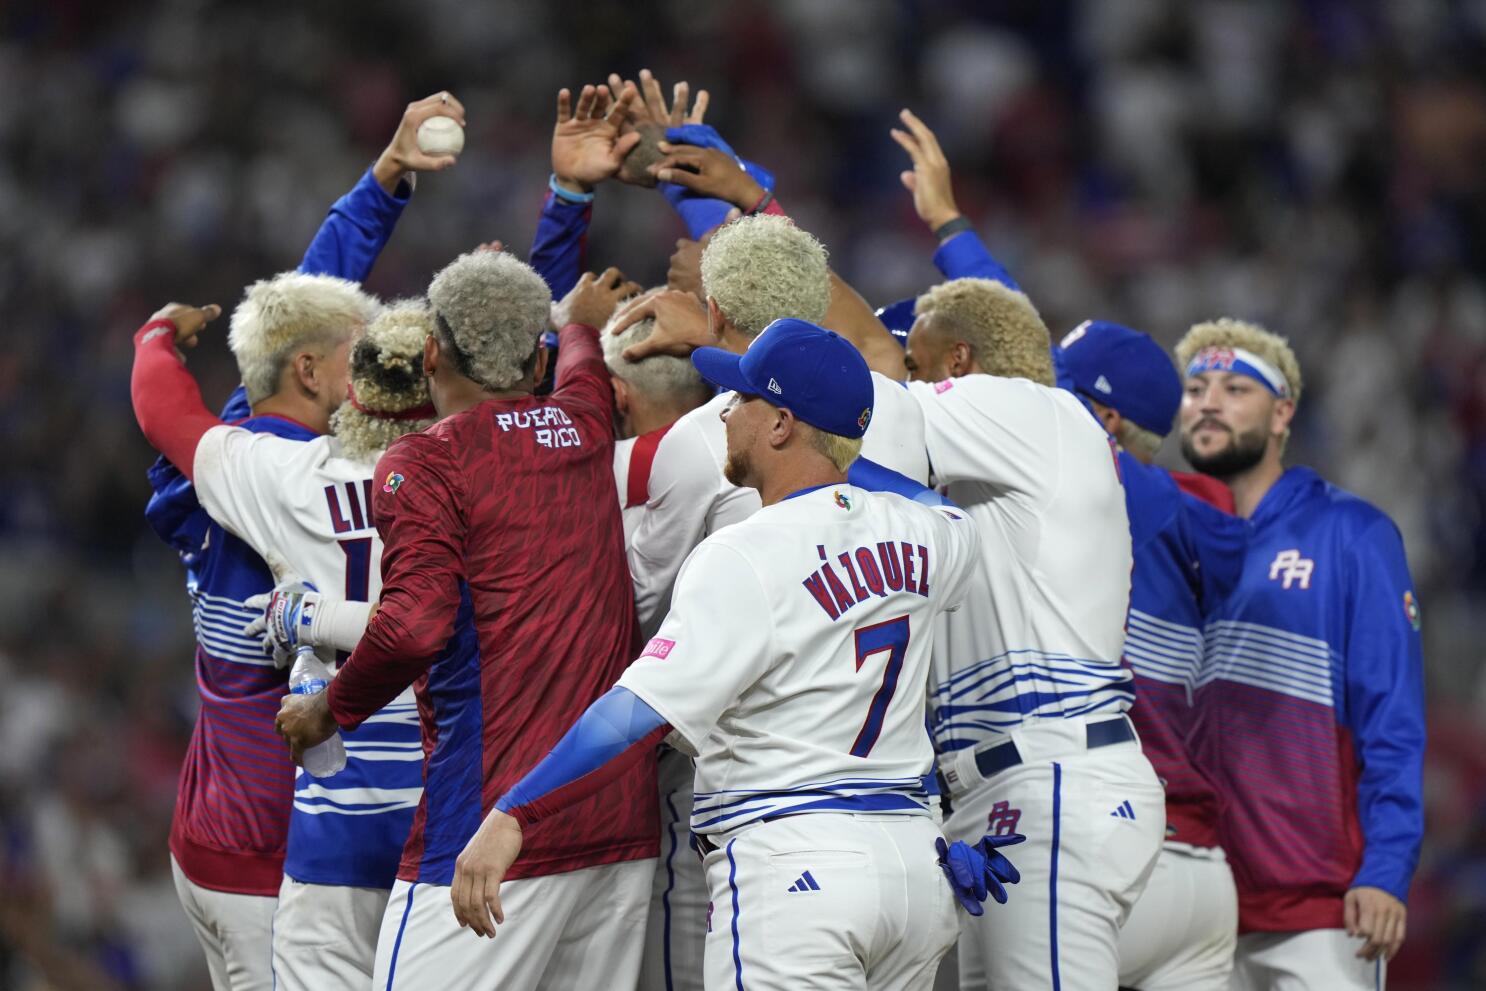 Puerto Rico Combines for First Perfect Game in W.B.C. History